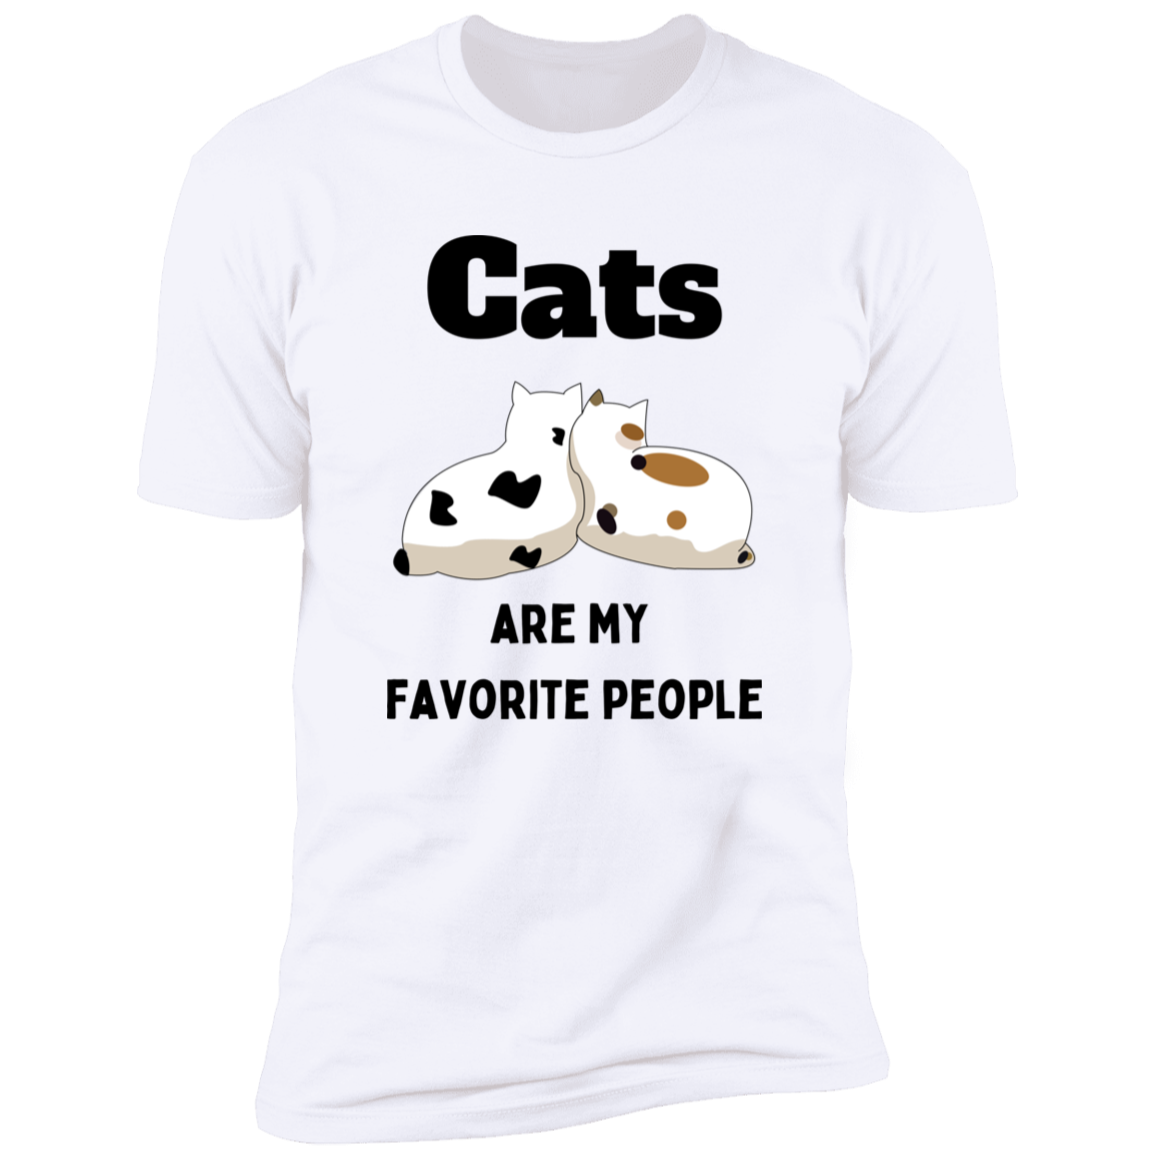 Cats Are My Favorite People T-shirt, Cat Shirt for humans, in white